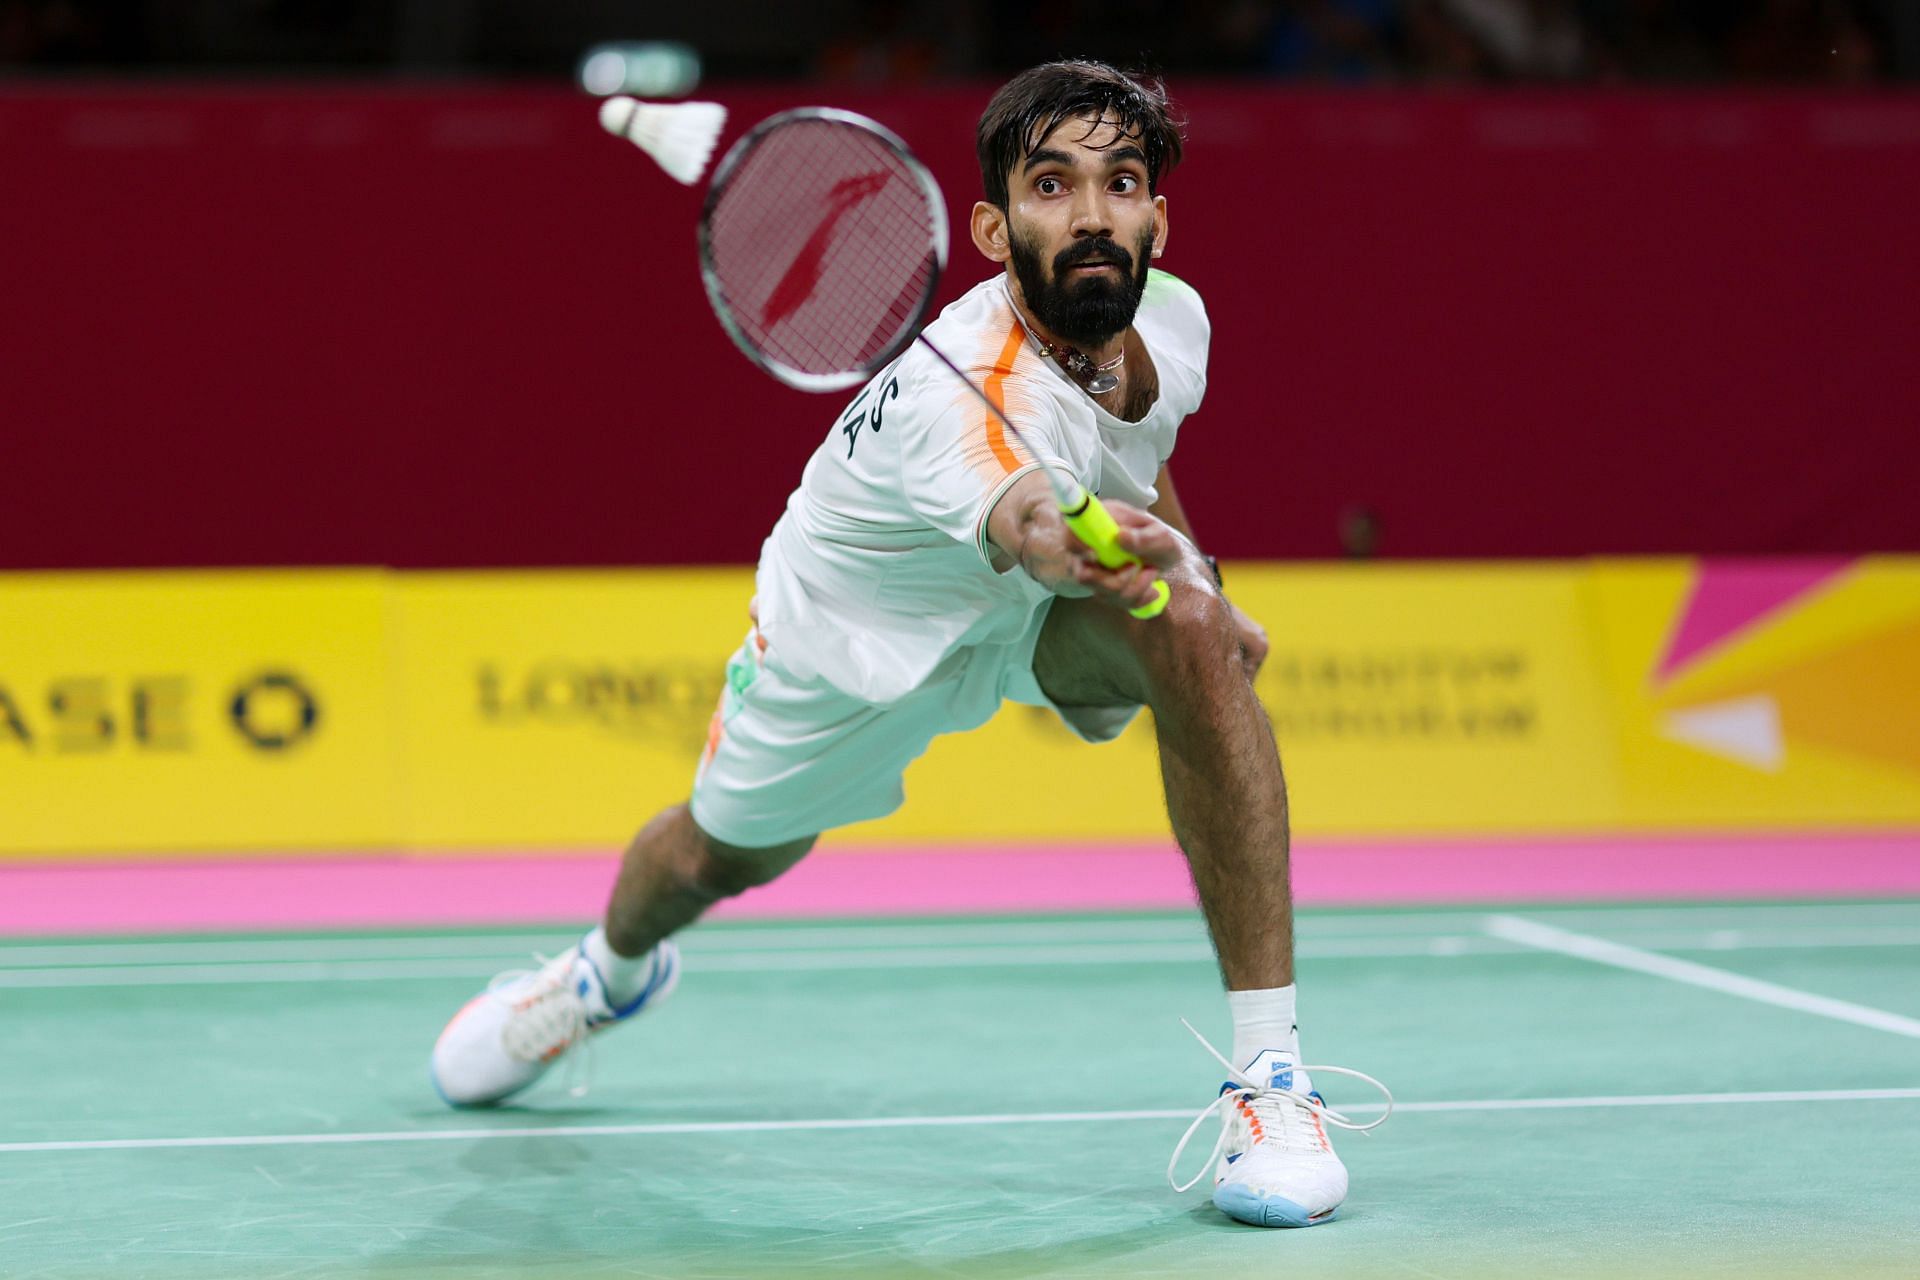 Kidambi Srikanth in action at the 2022 Commonwealth Games (Image: Getty)